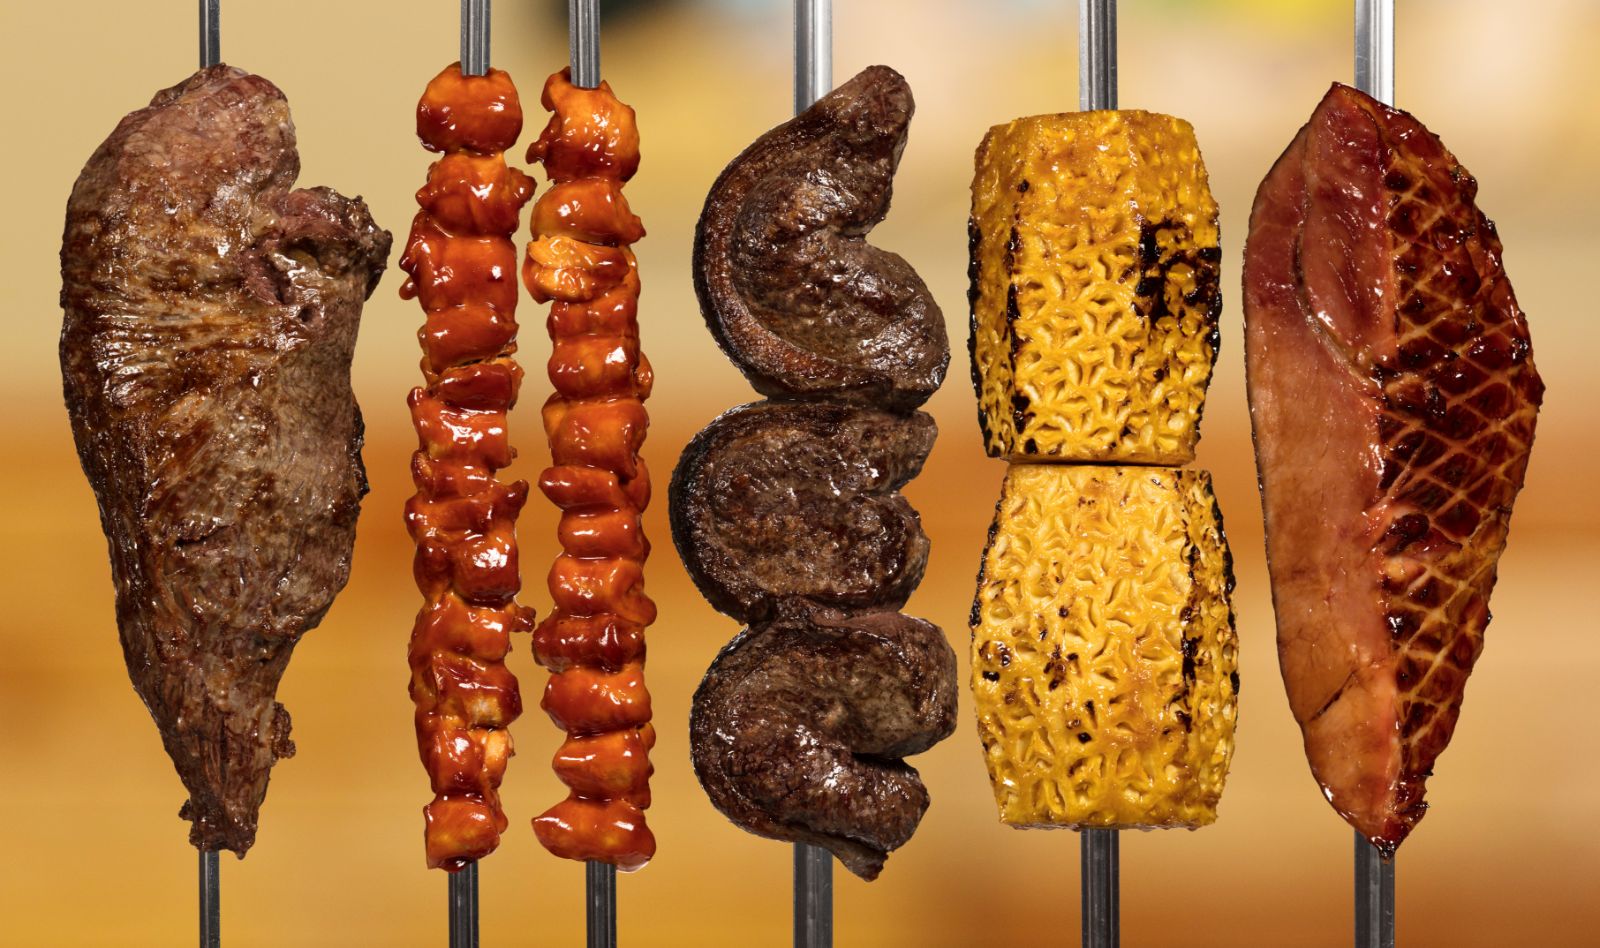 https://www.rodiziogrill.com/files/4103/Rodizio_Grill_skewered_meats-grouping_no3.jpg